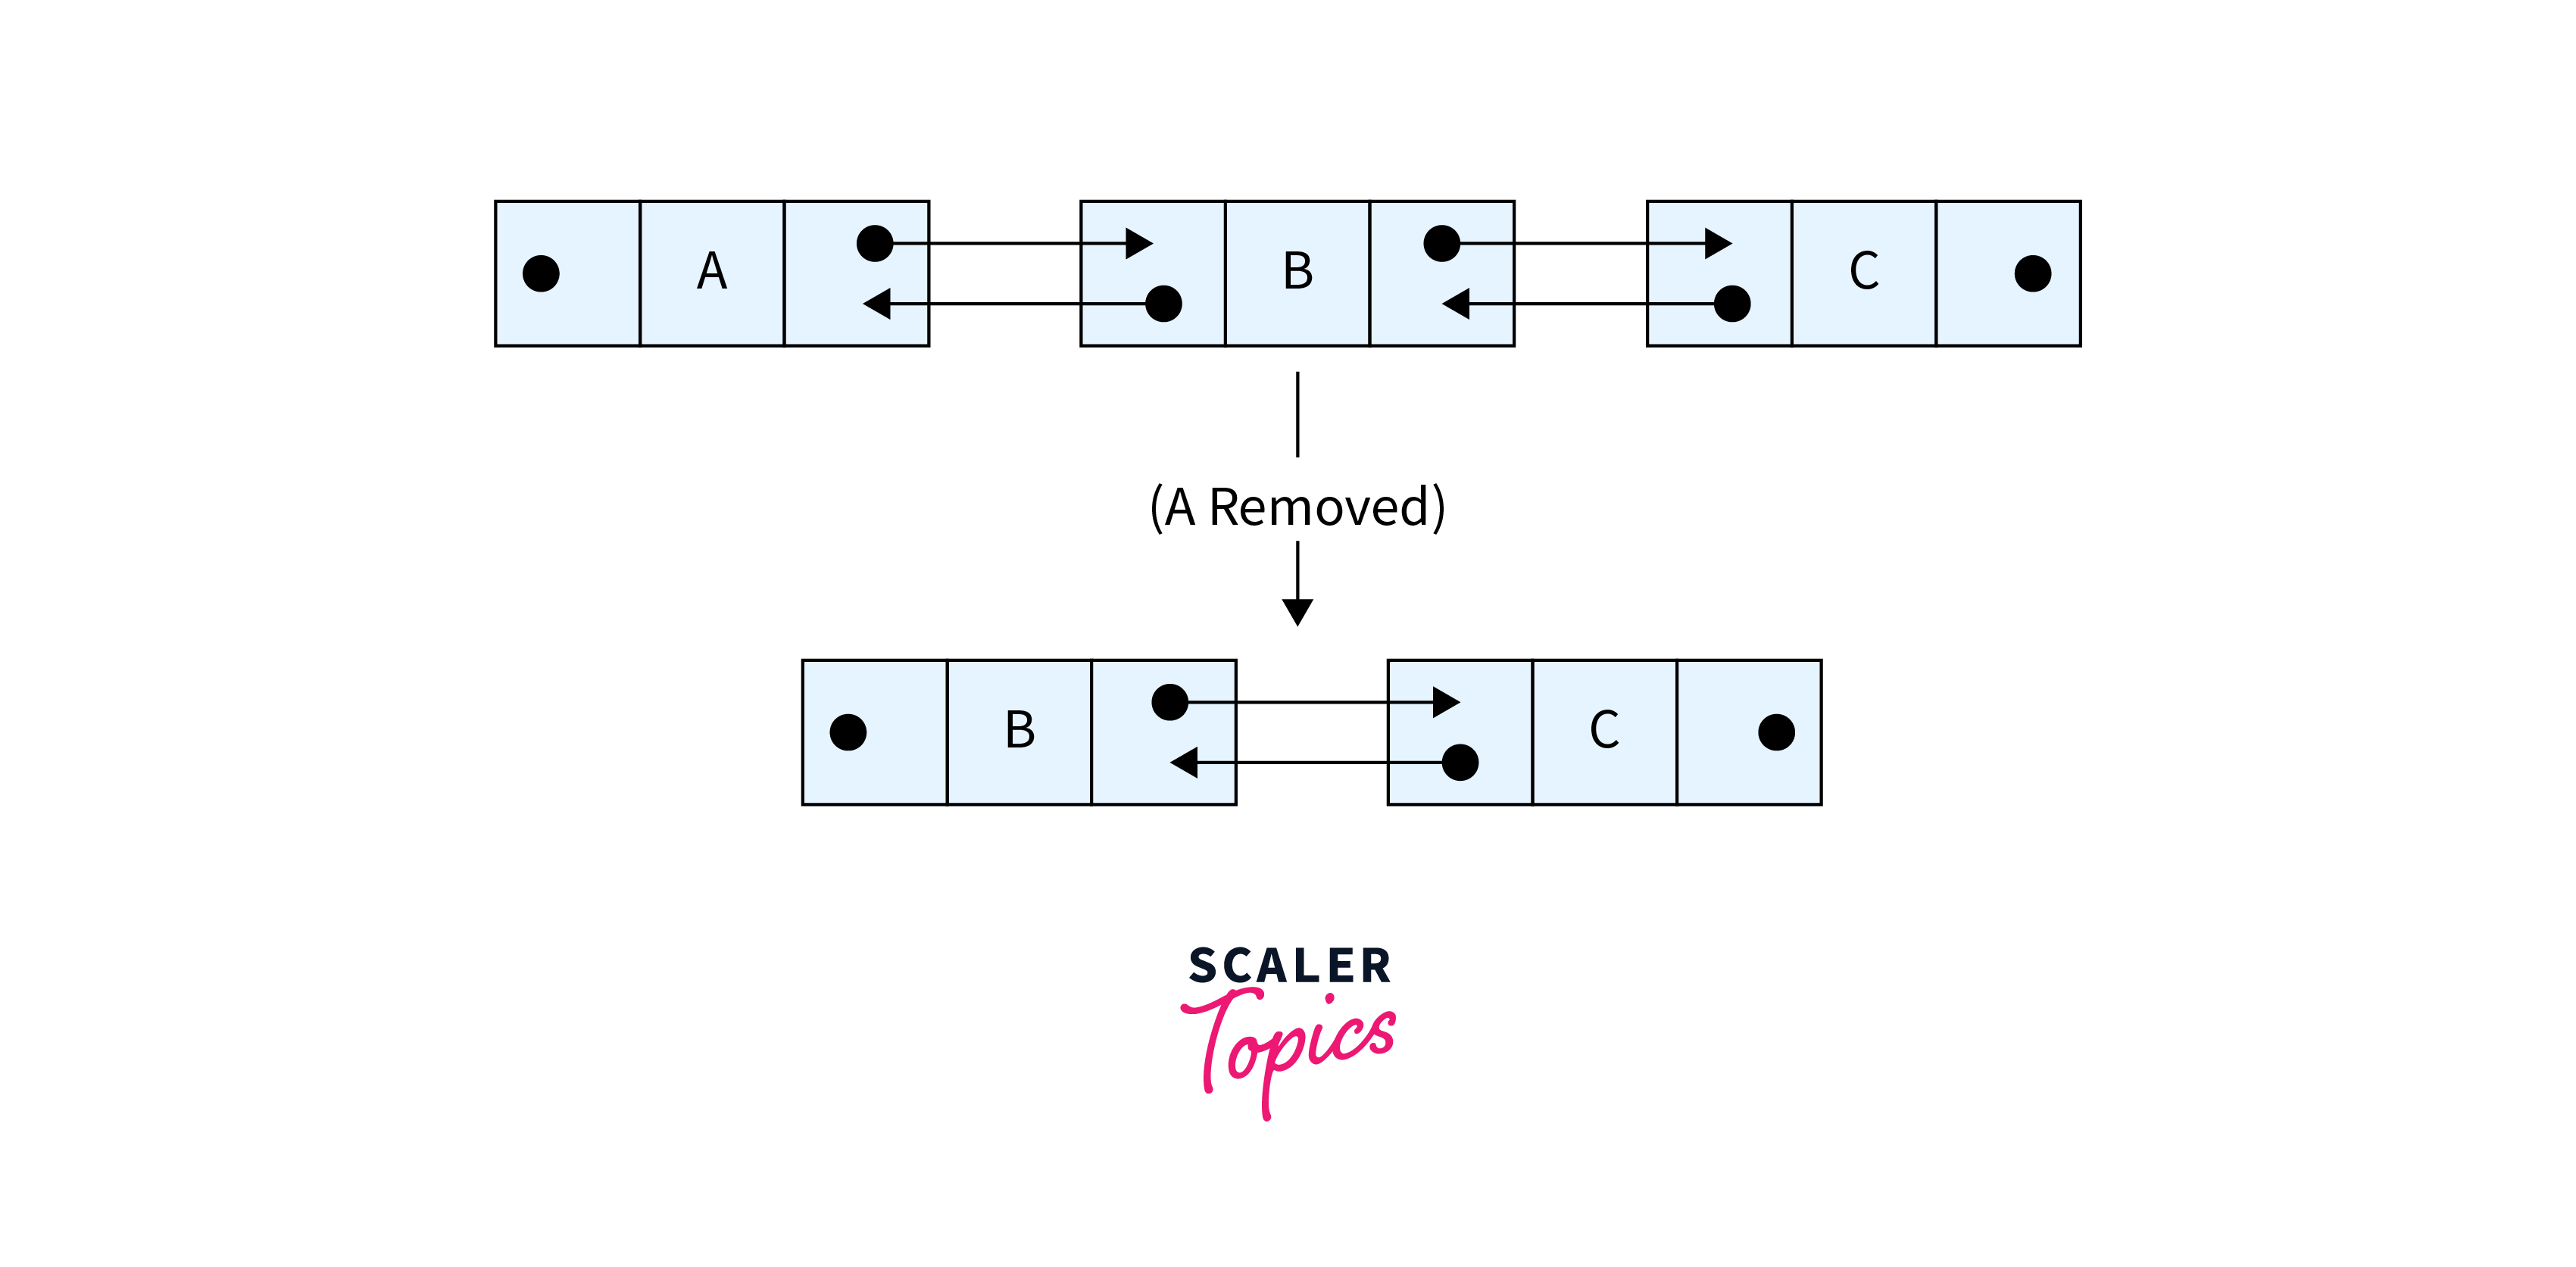 Deletion at the Begining in the Linked List